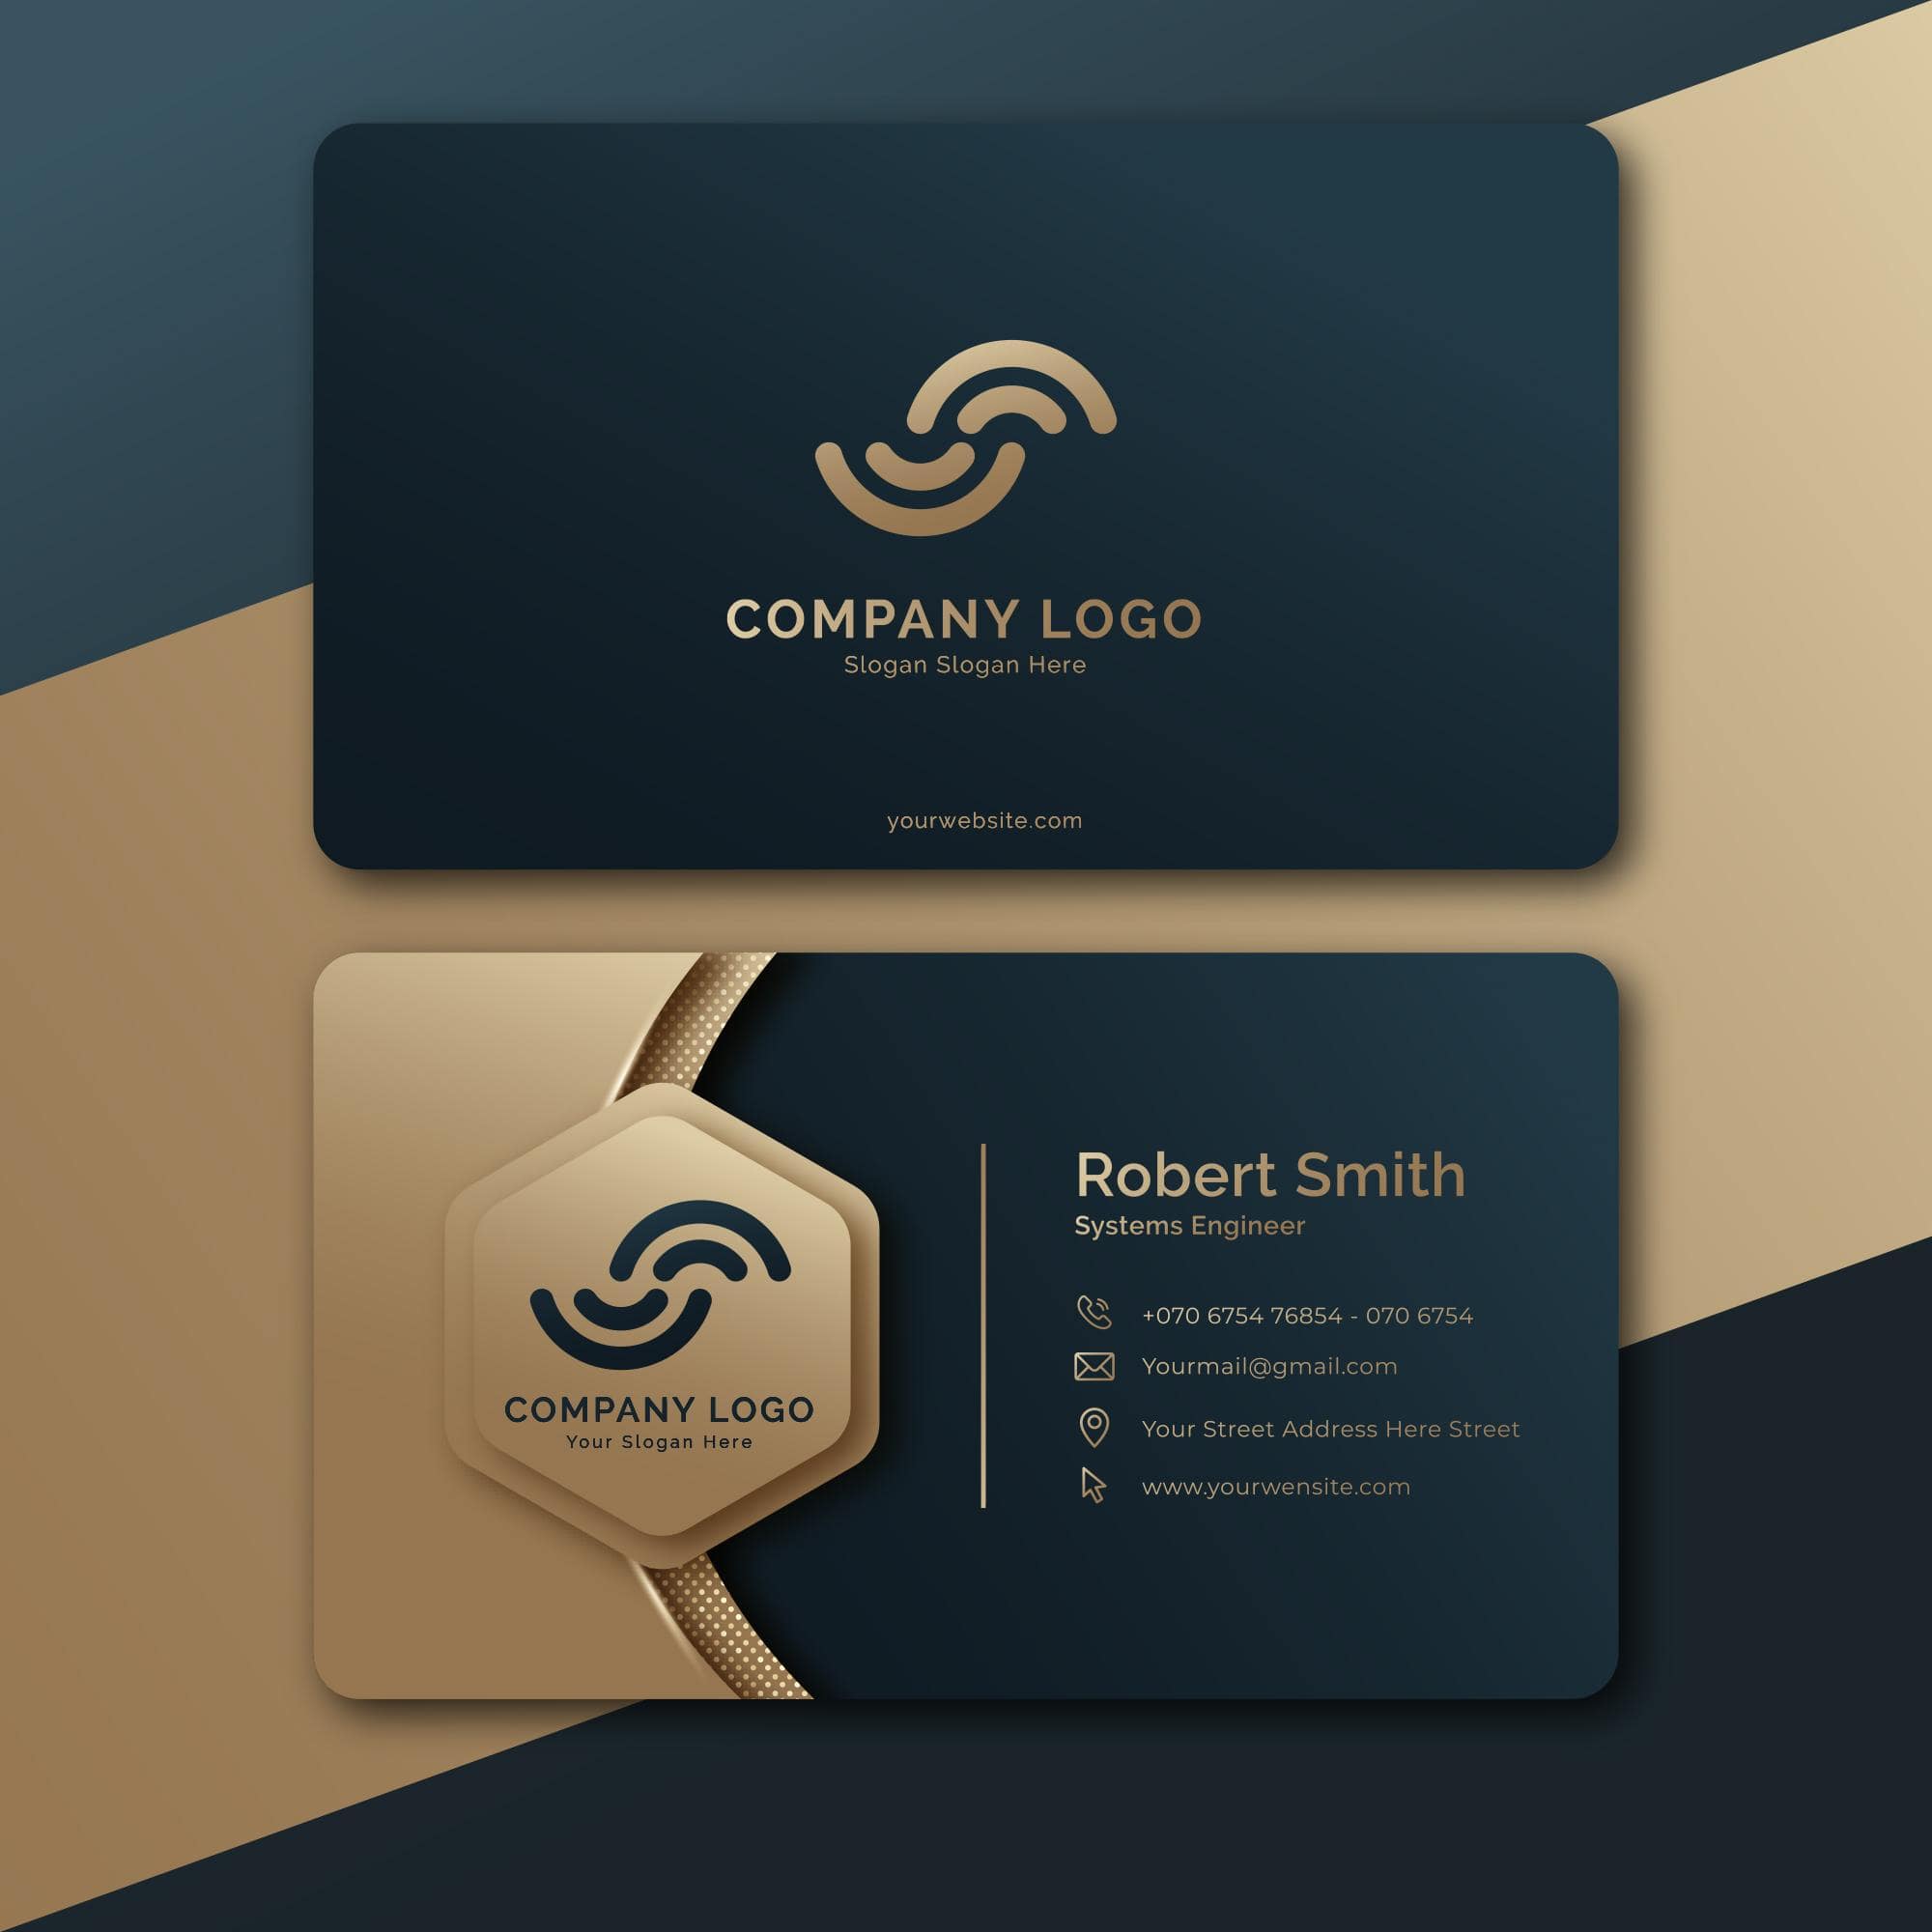 Business Cards Printing Services In The London